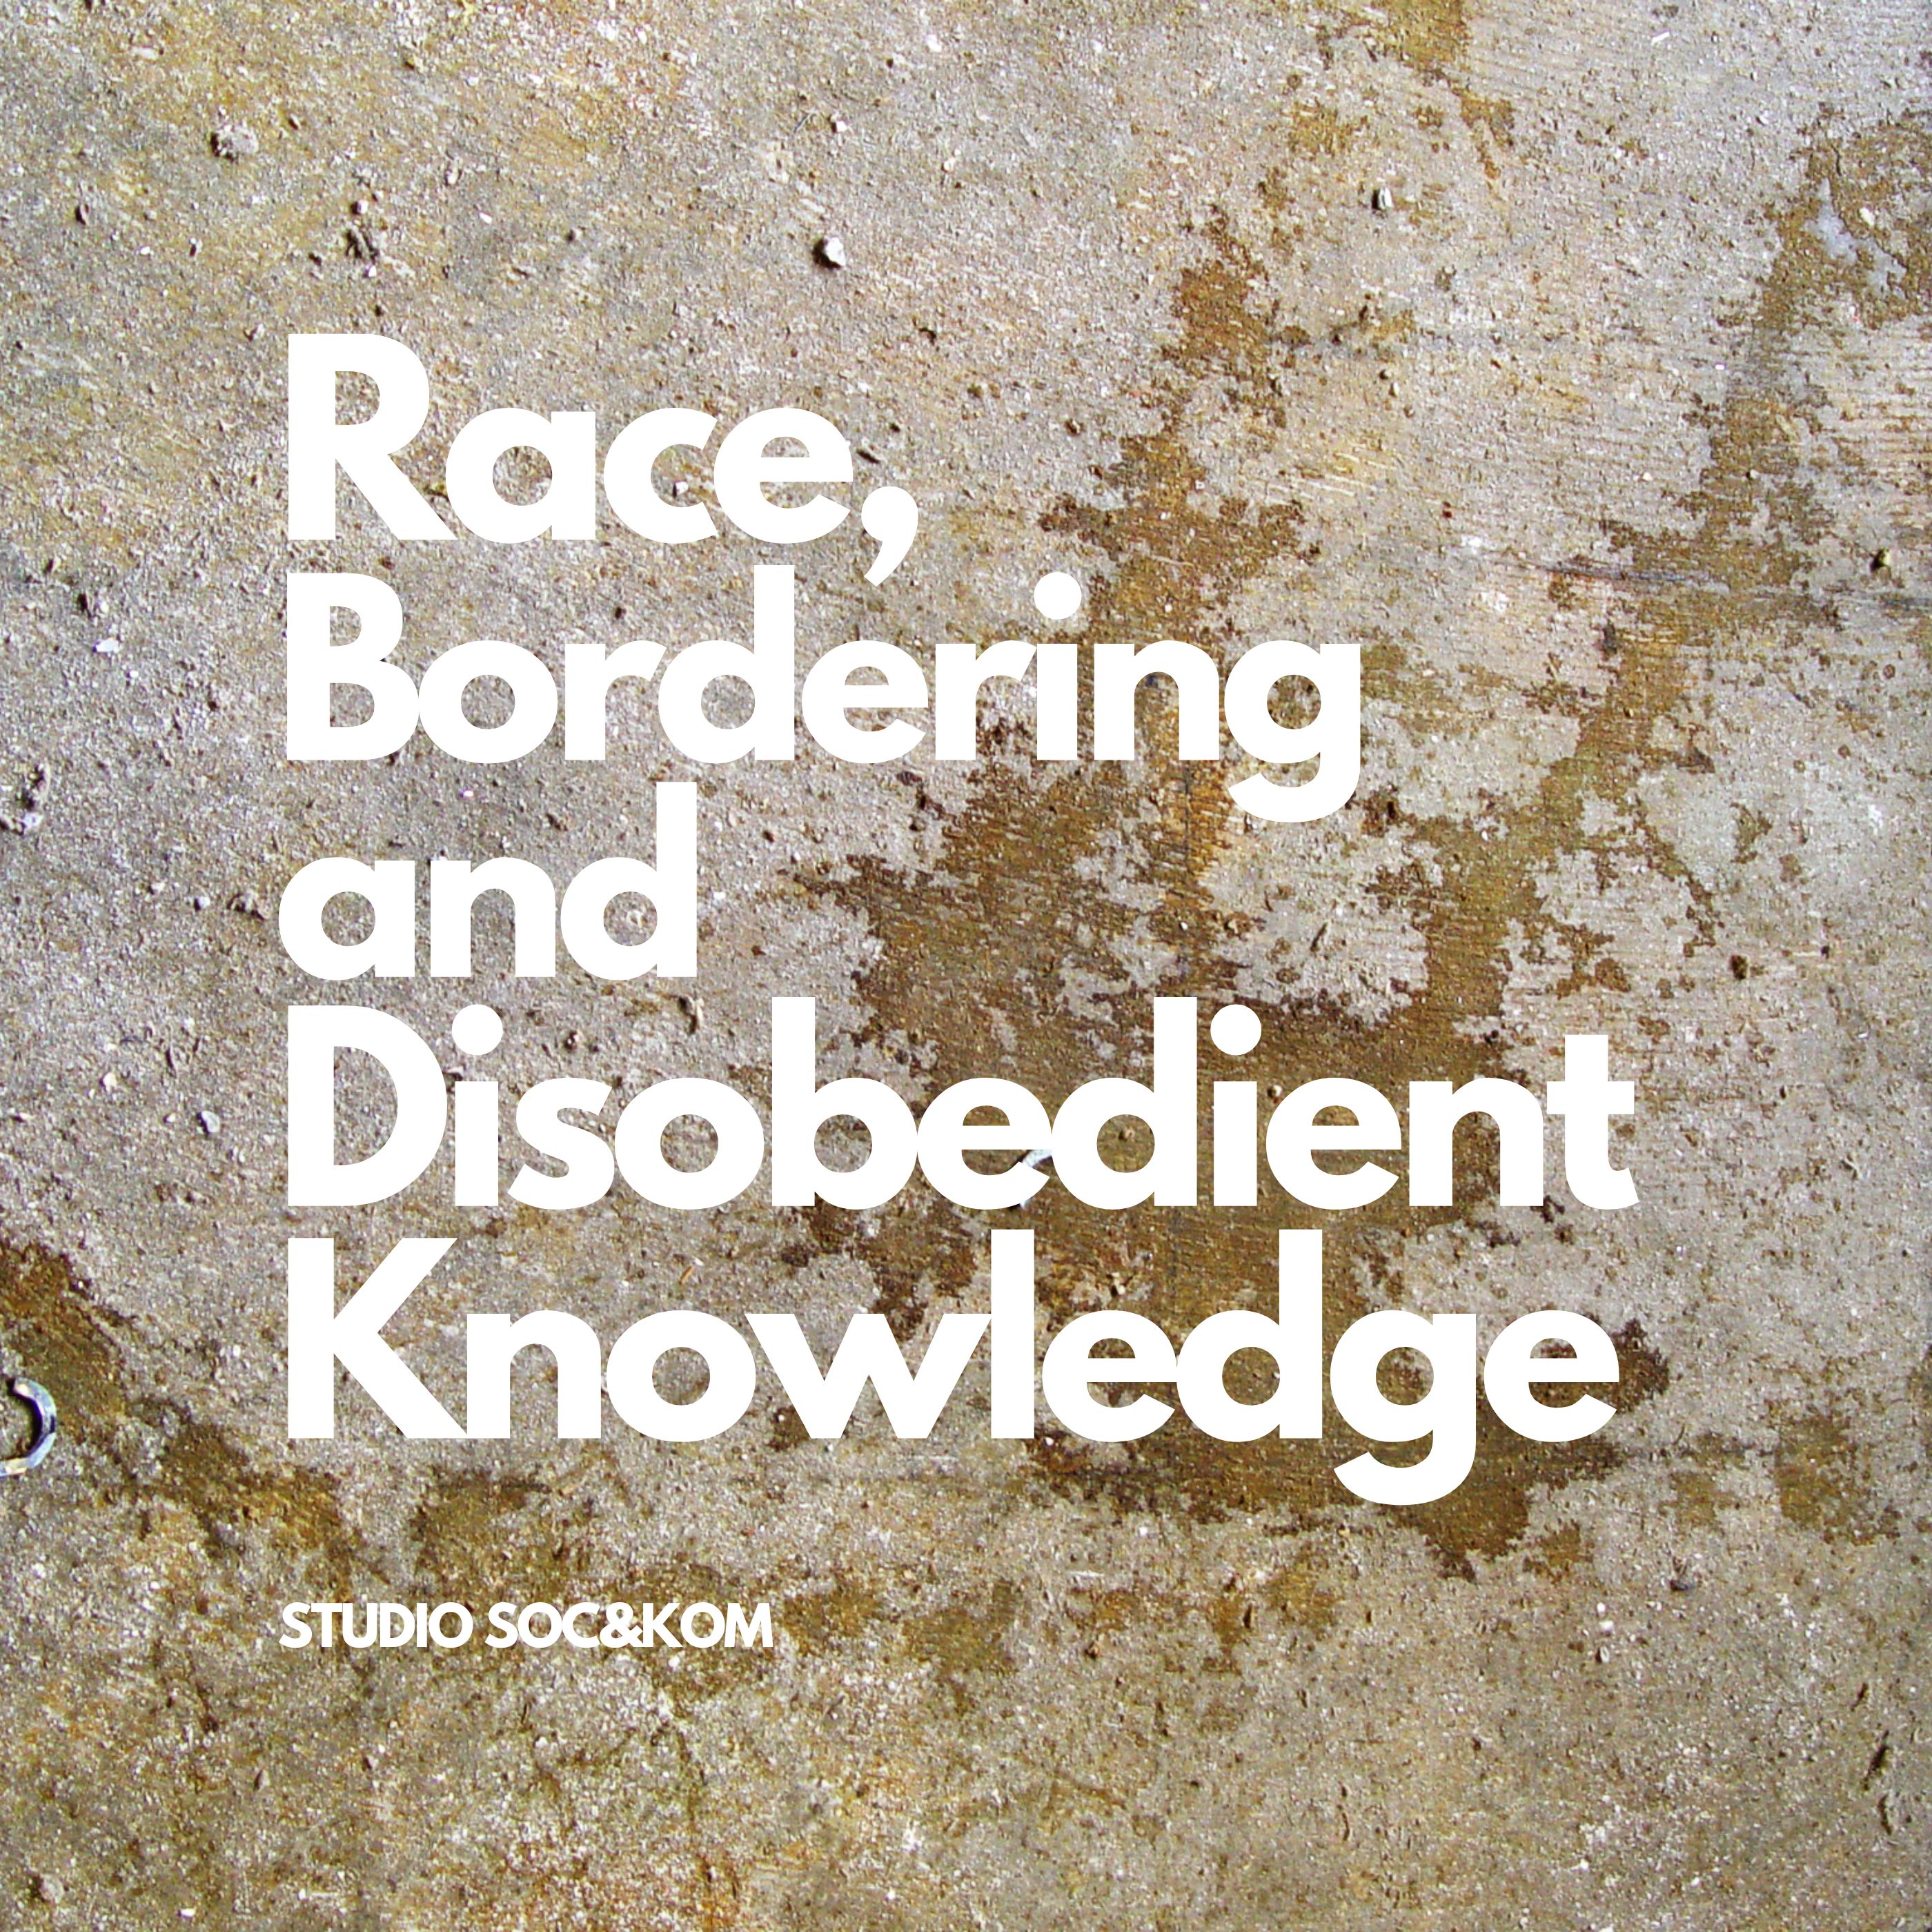 #6: Disobedient knowledge in antiracist activism